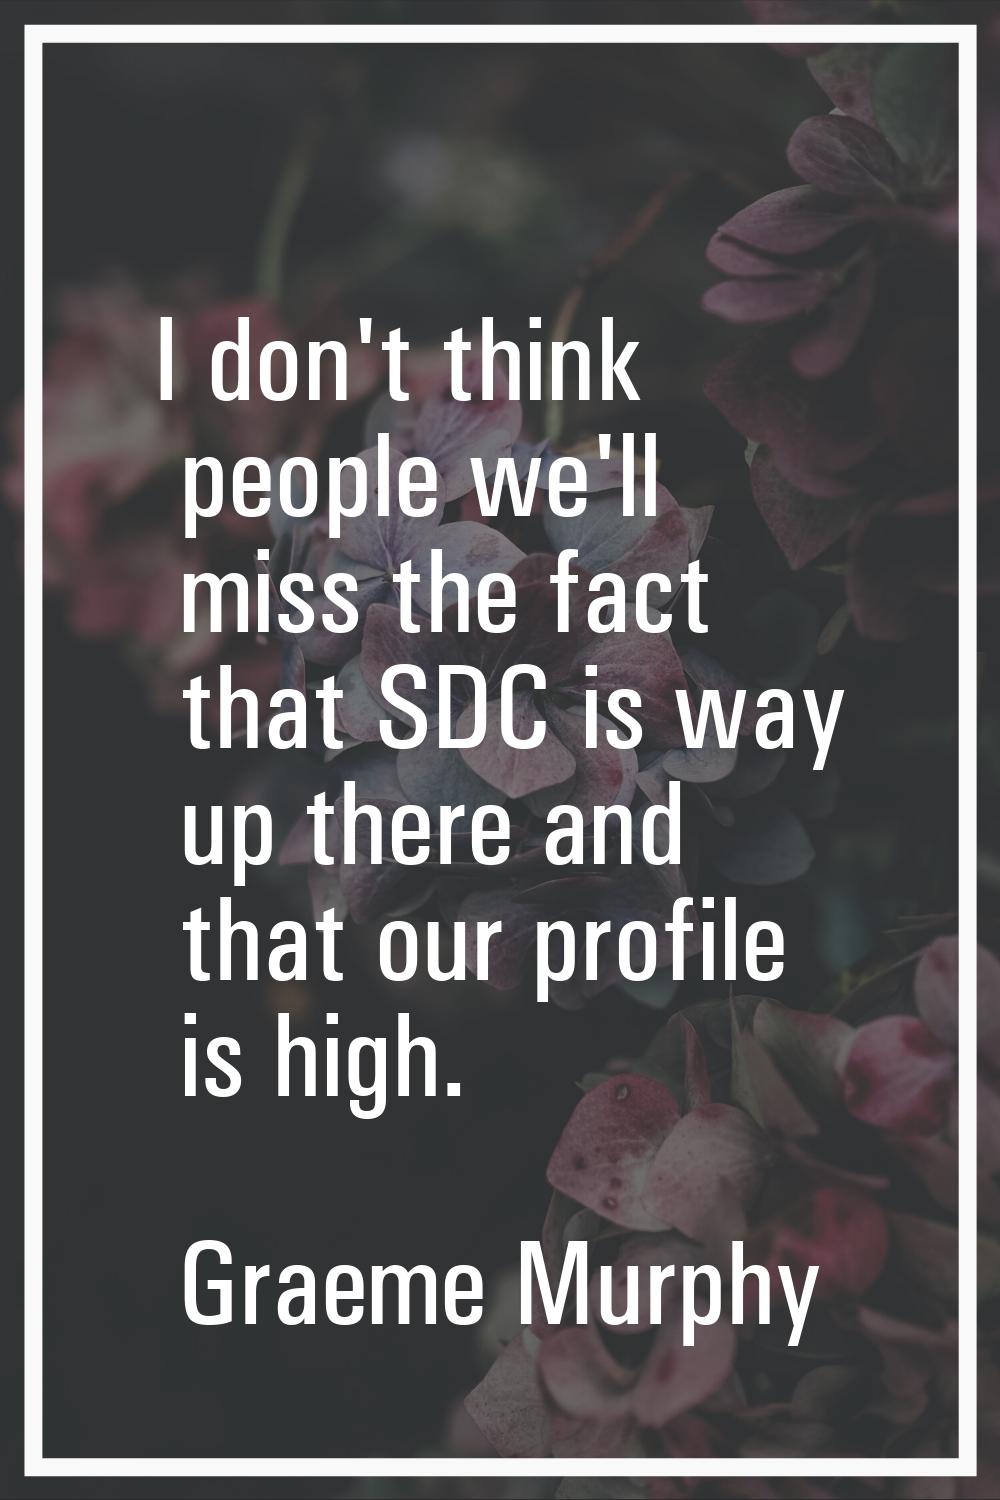 I don't think people we'll miss the fact that SDC is way up there and that our profile is high.